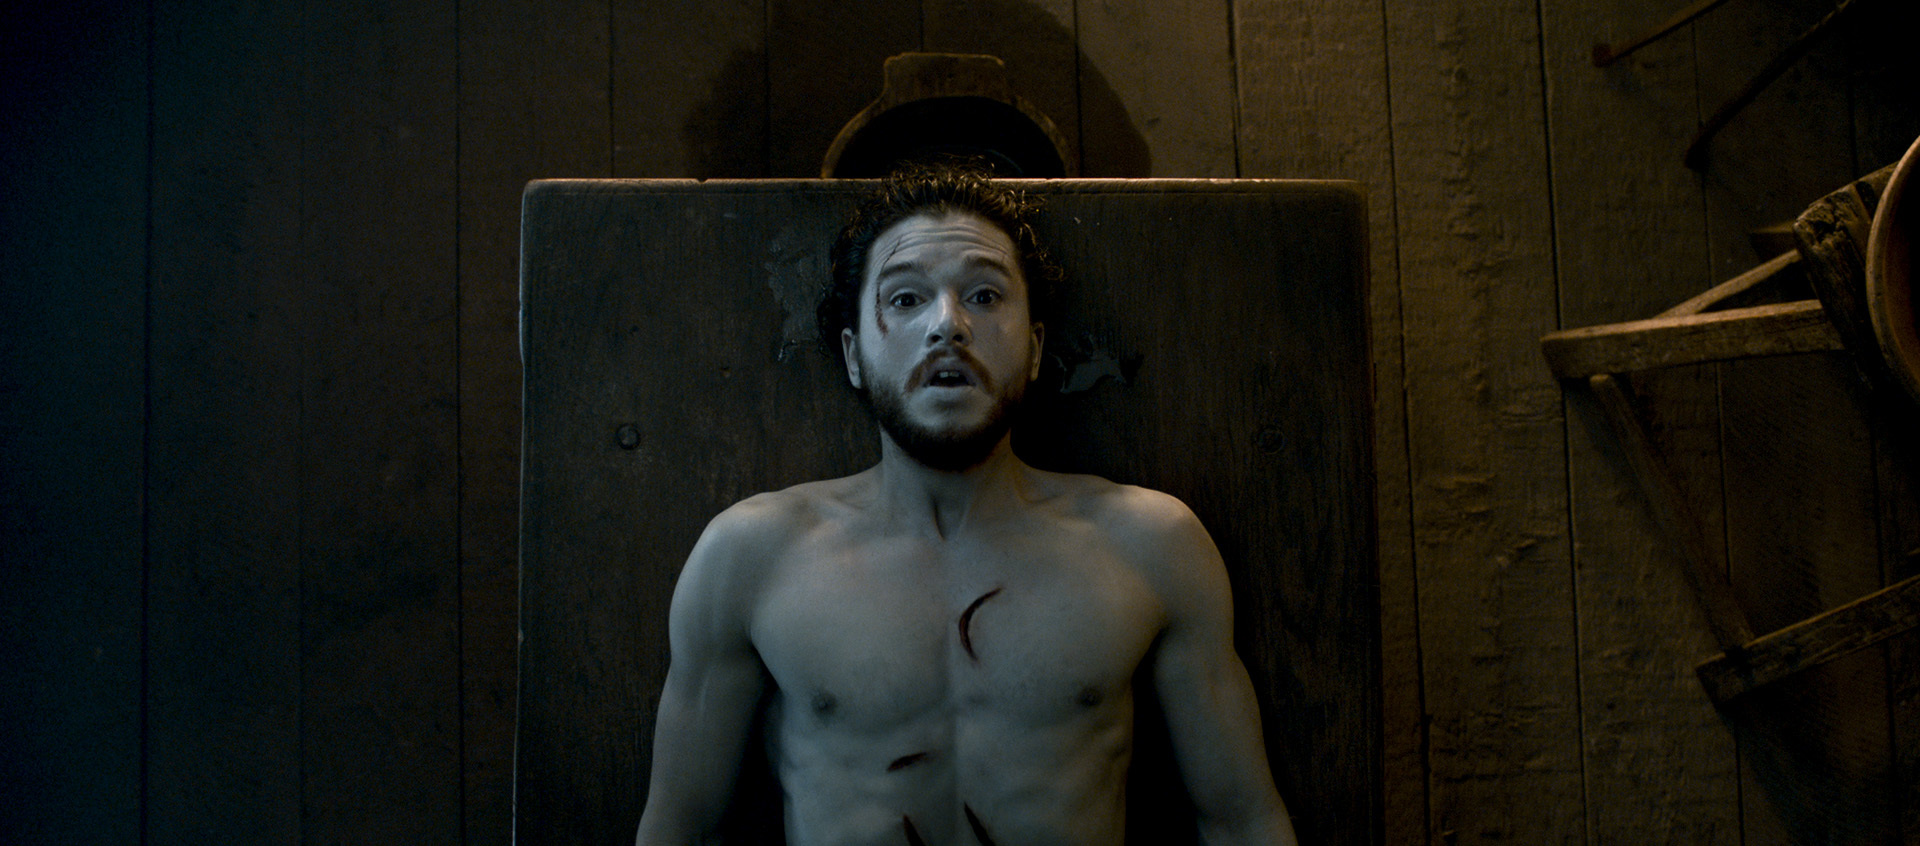 Remember when Jon Snow came back from the dead?